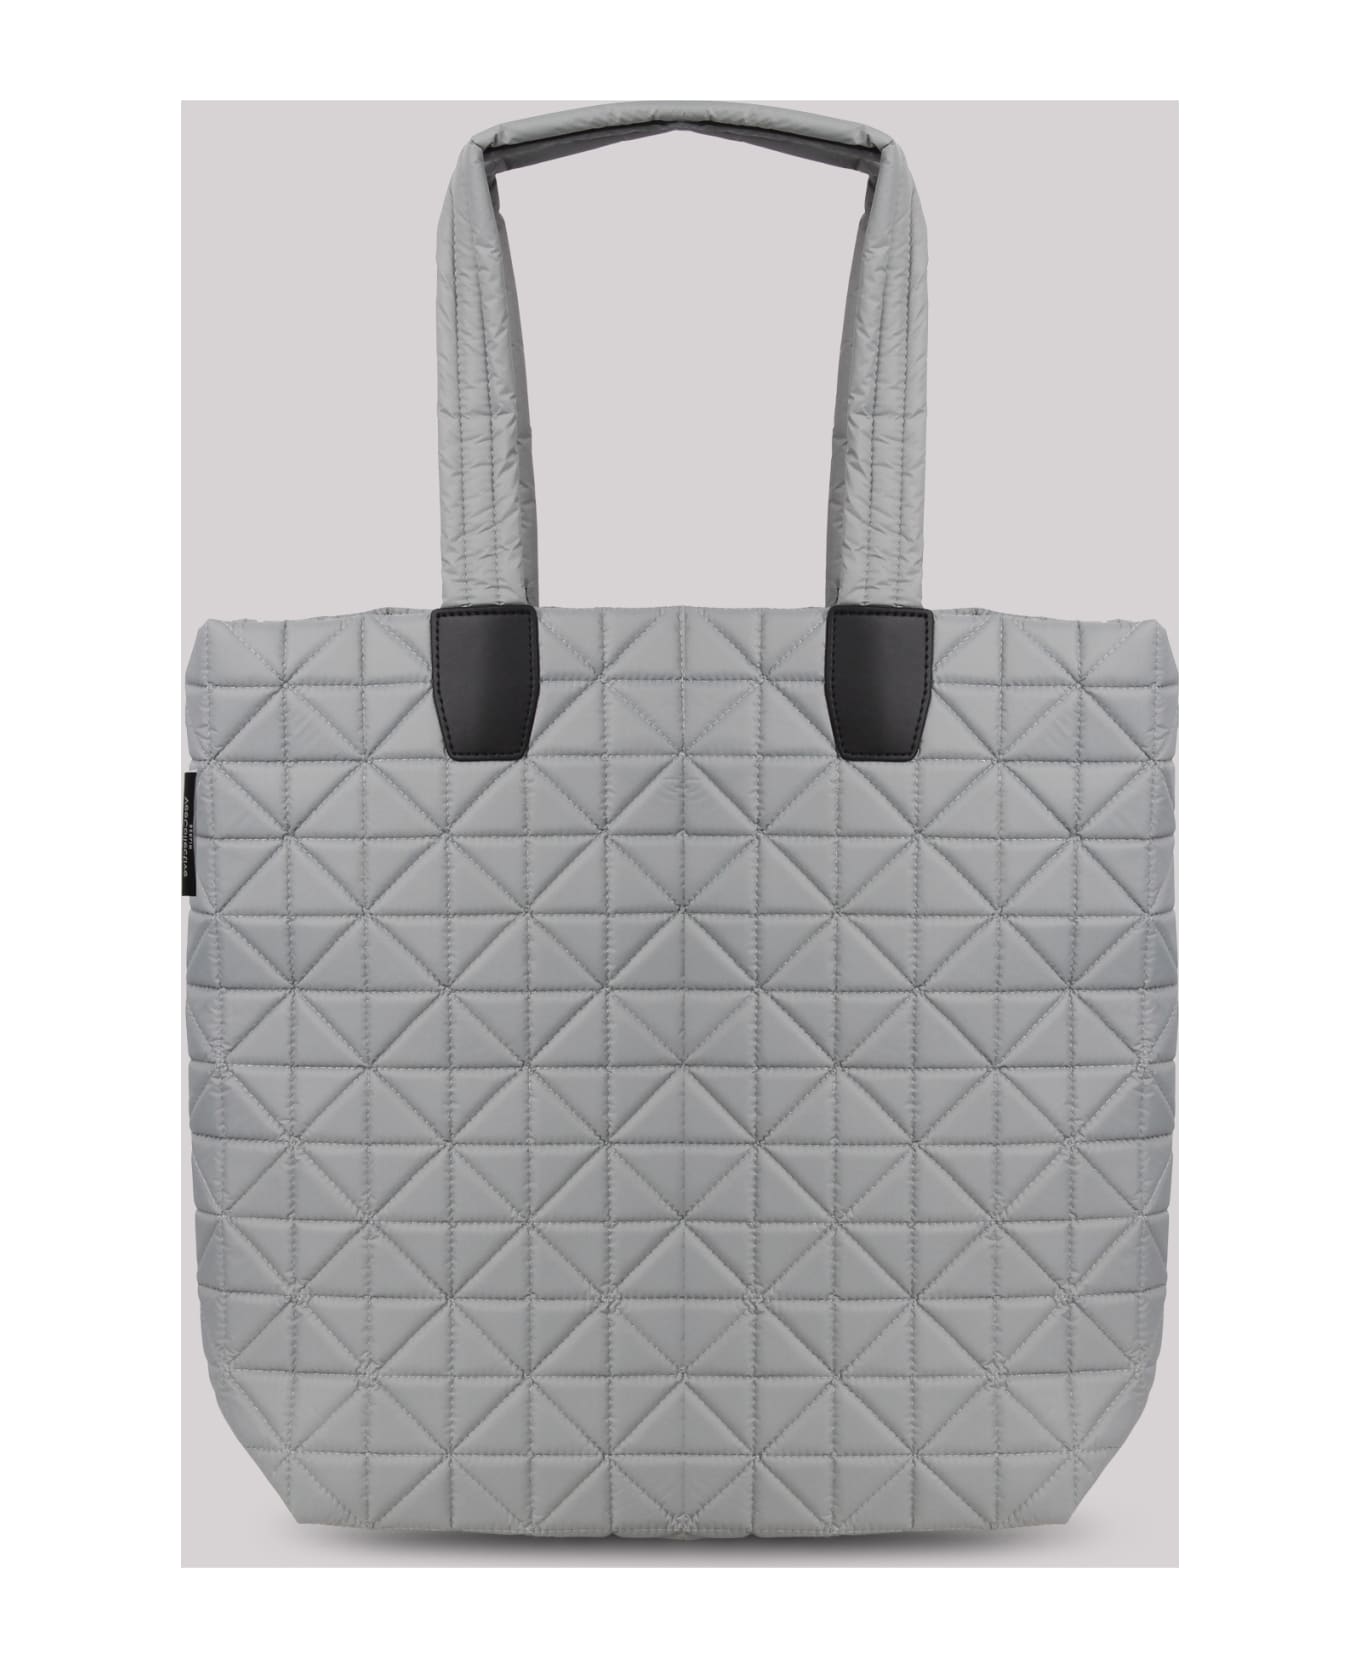 VeeCollective Vee Collective Large Vee Geometric Tote Bag トートバッグ